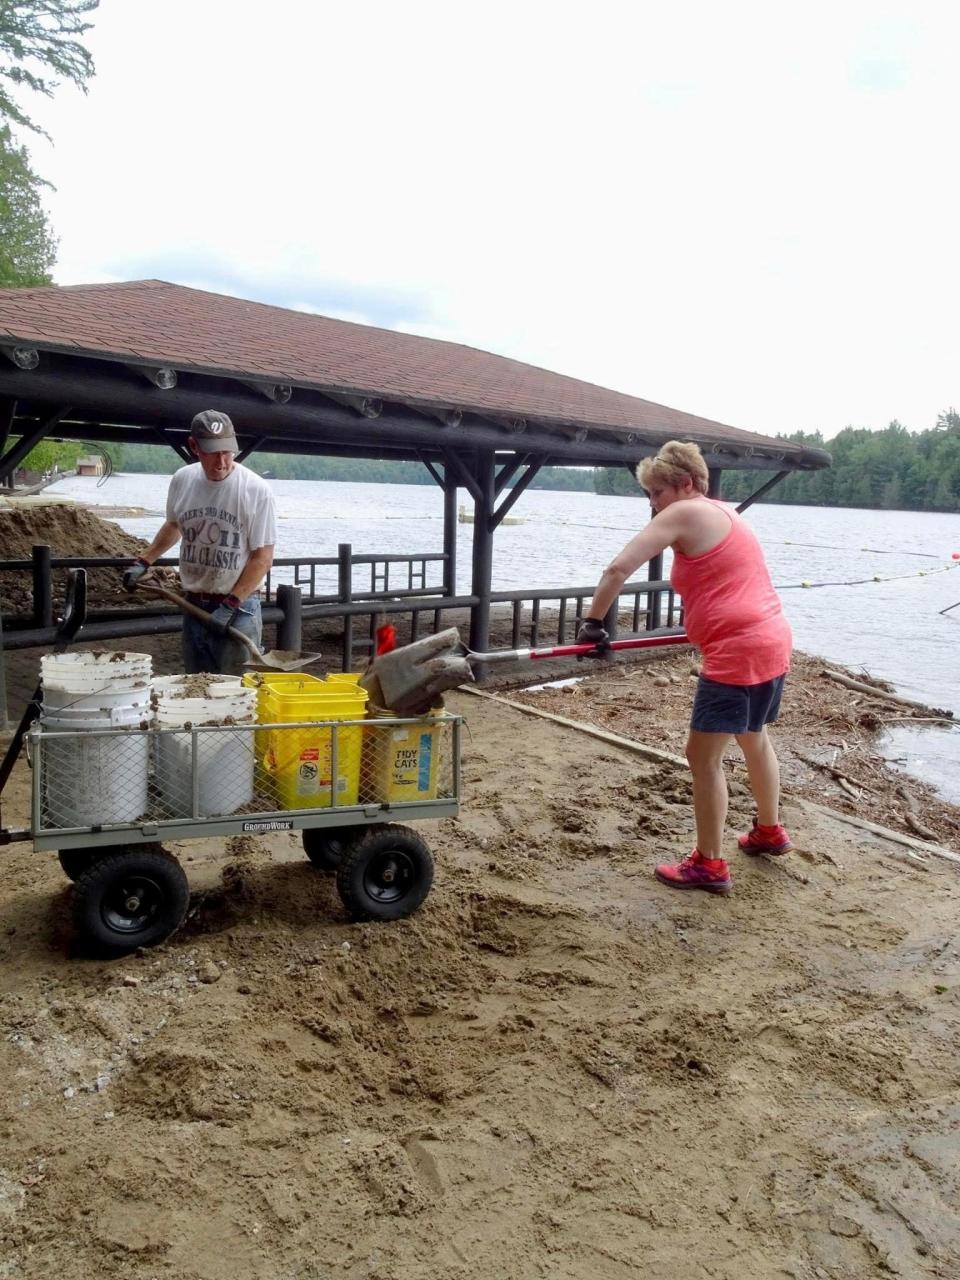 A man and woman clear debris from a boathouse on the water.